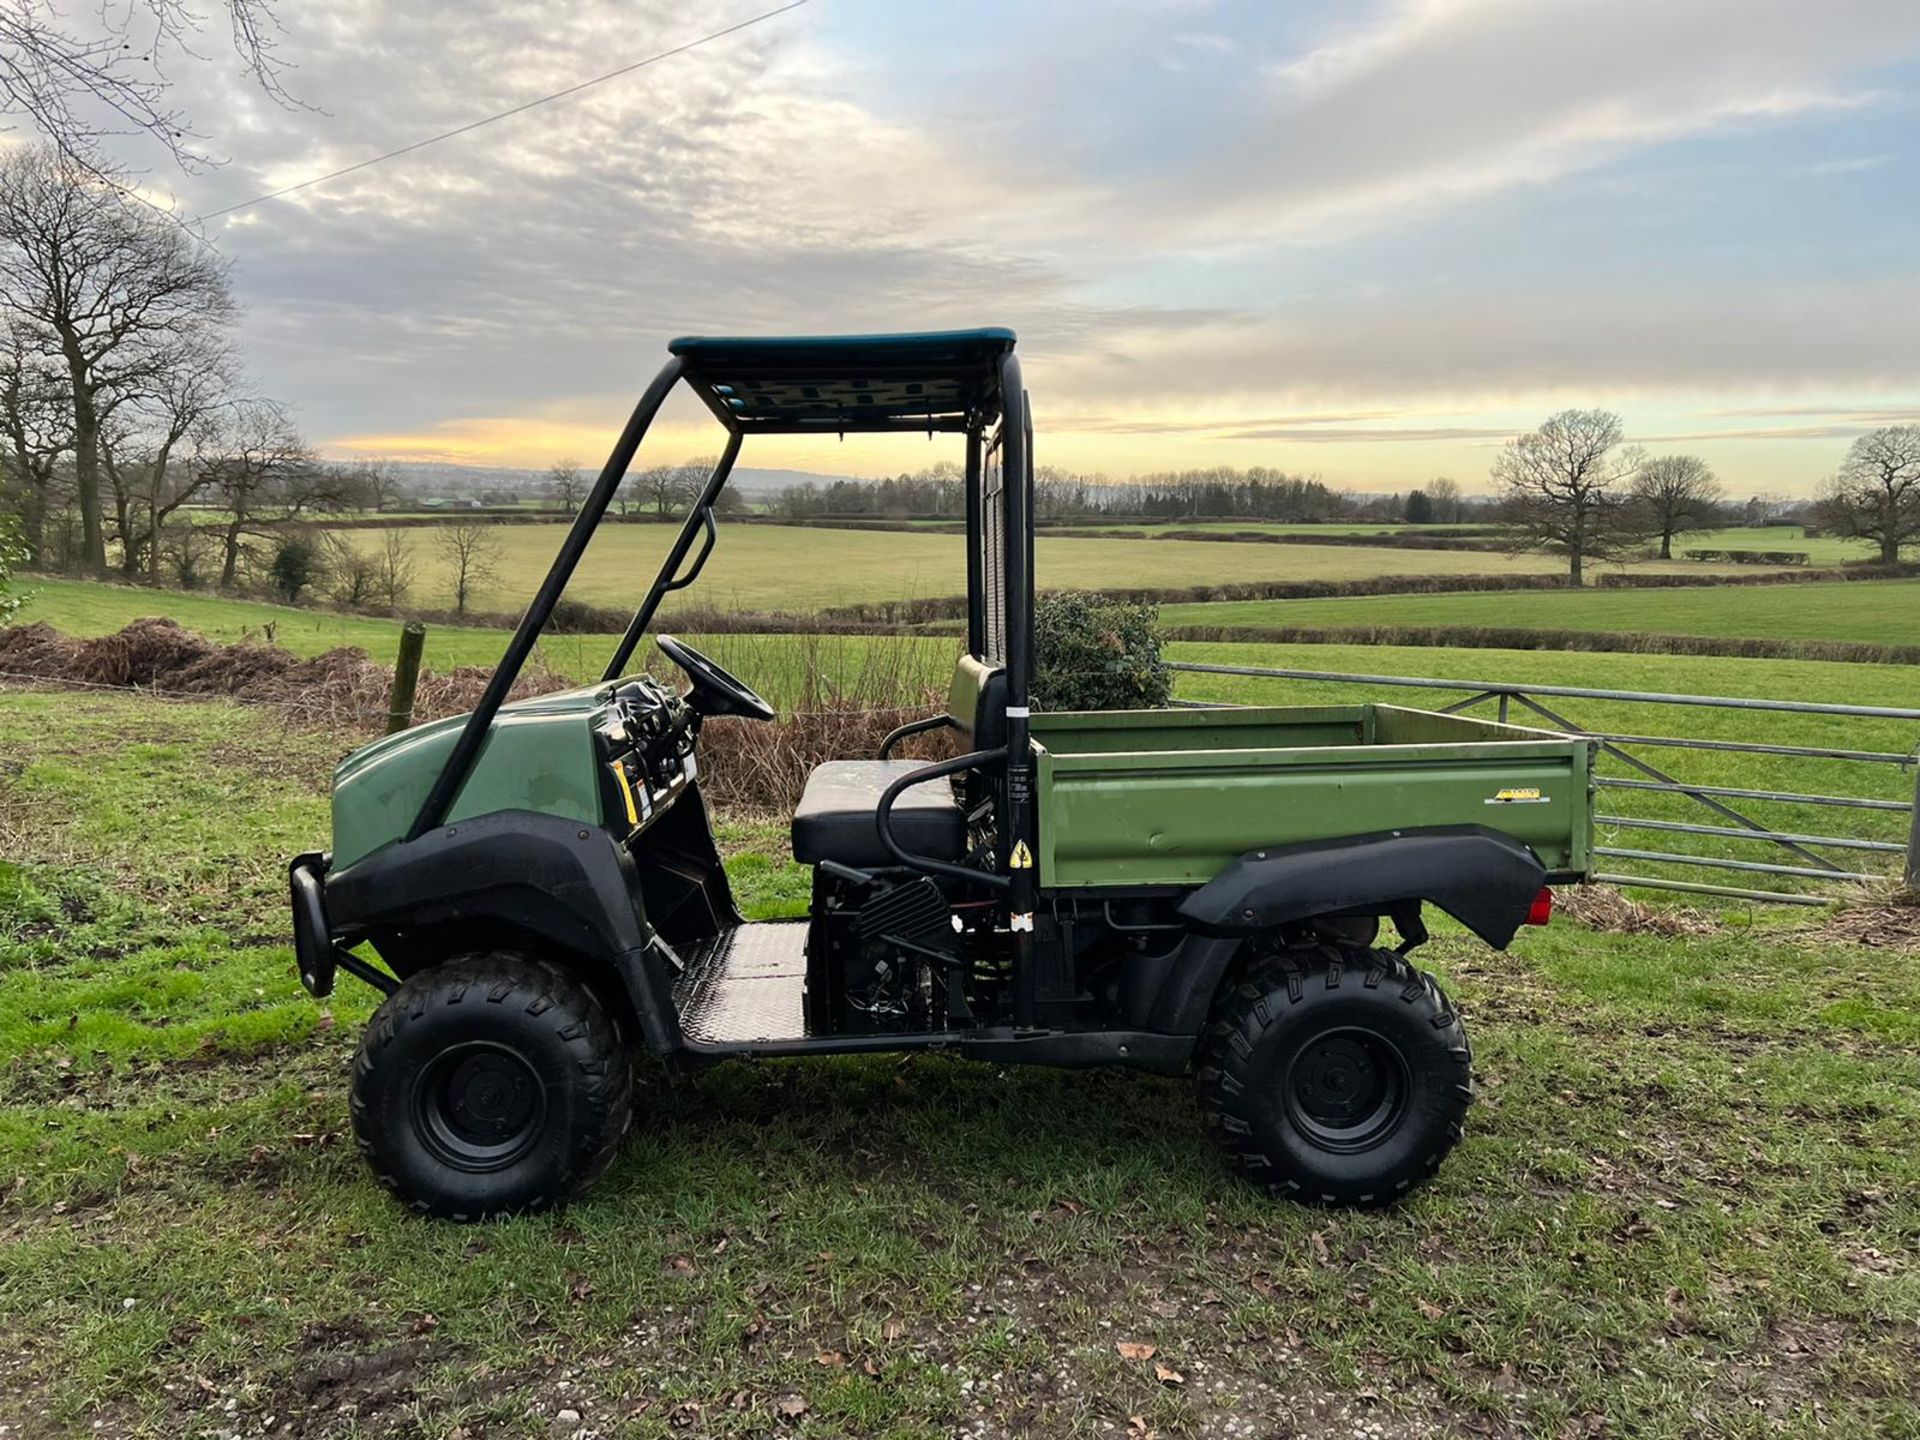 2014/64 KAWASAKI MULE 4010 4WD BUGGI, RUNS AND DRIVES, SHOWING A LOW 2978 HOURS *PLUS VAT* - Image 4 of 14